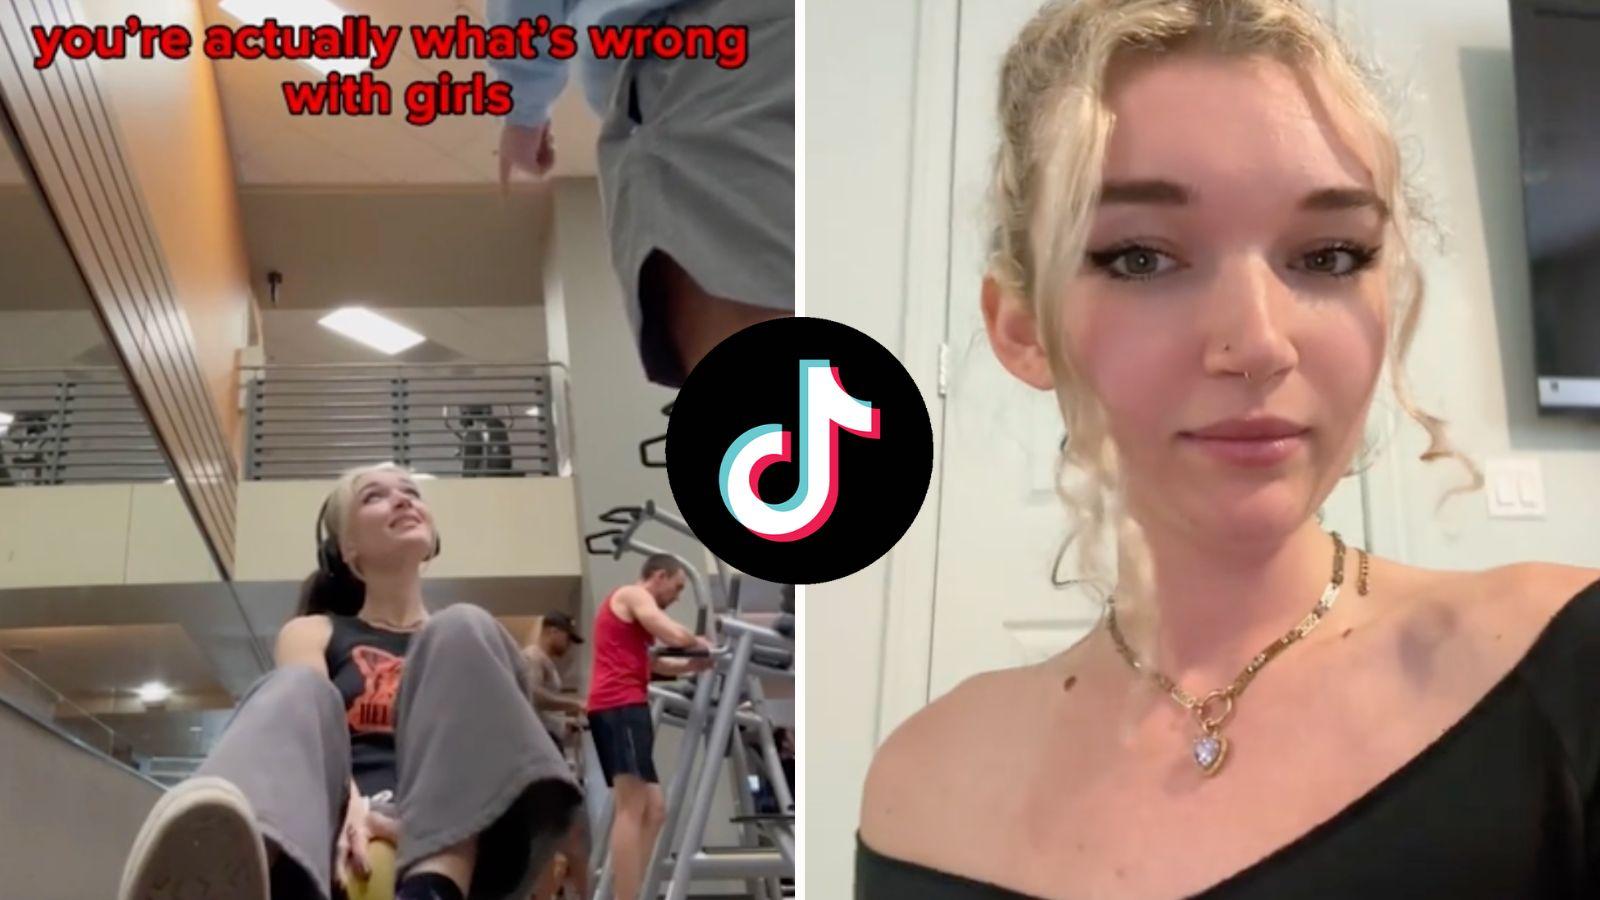 TikToker responds after viral gym clip of man telling her she's "what's wrong with girls"